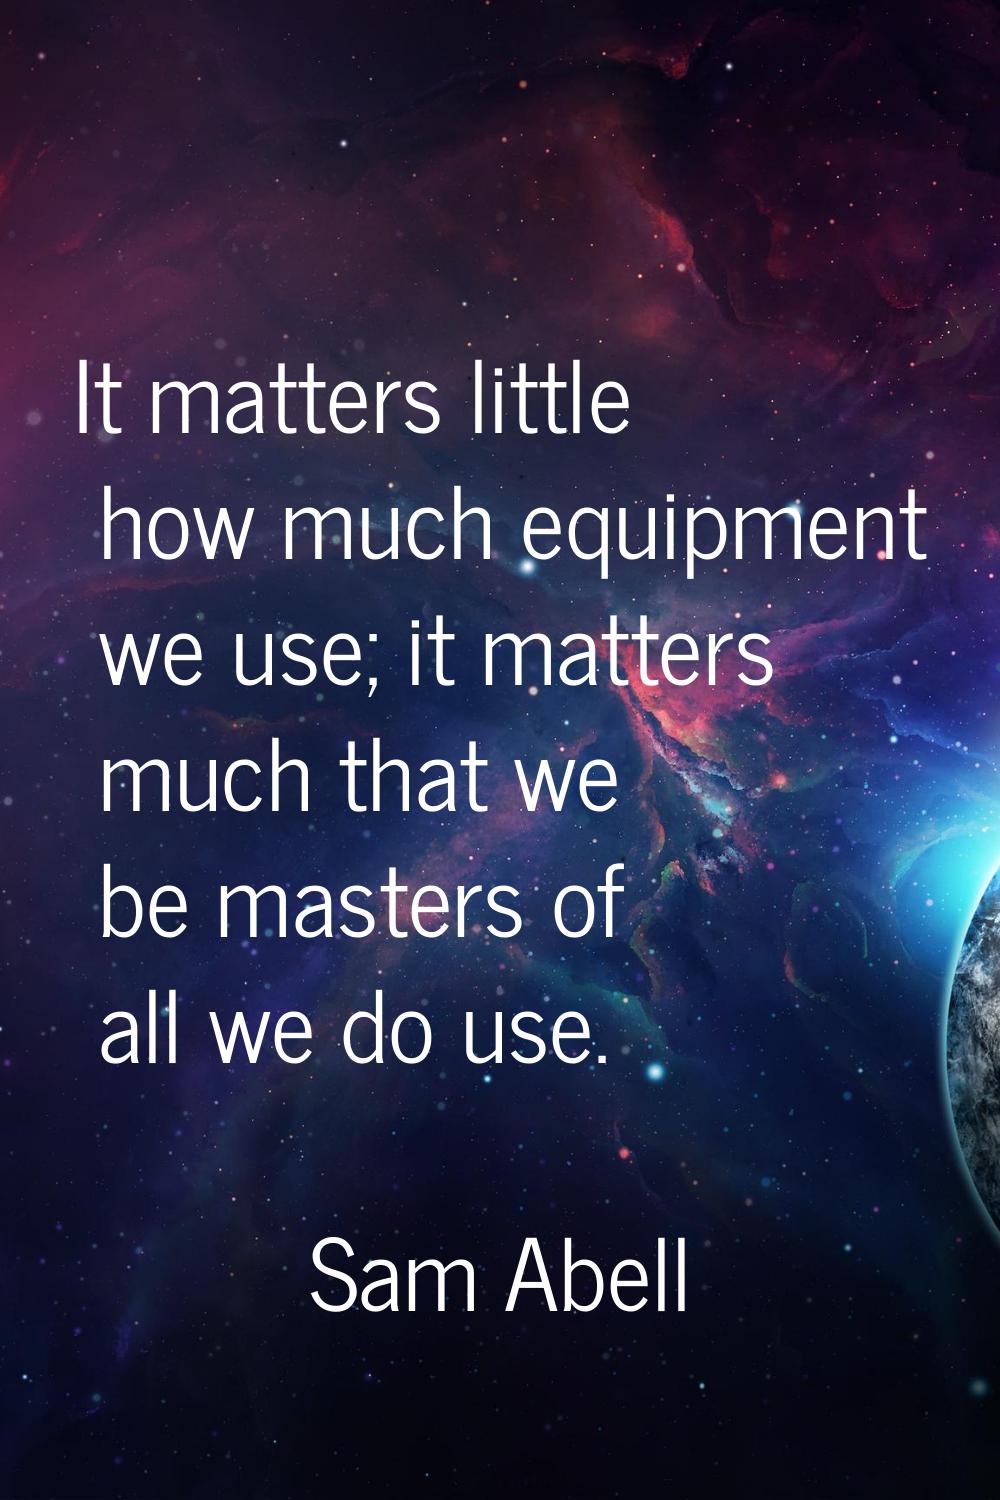 It matters little how much equipment we use; it matters much that we be masters of all we do use.